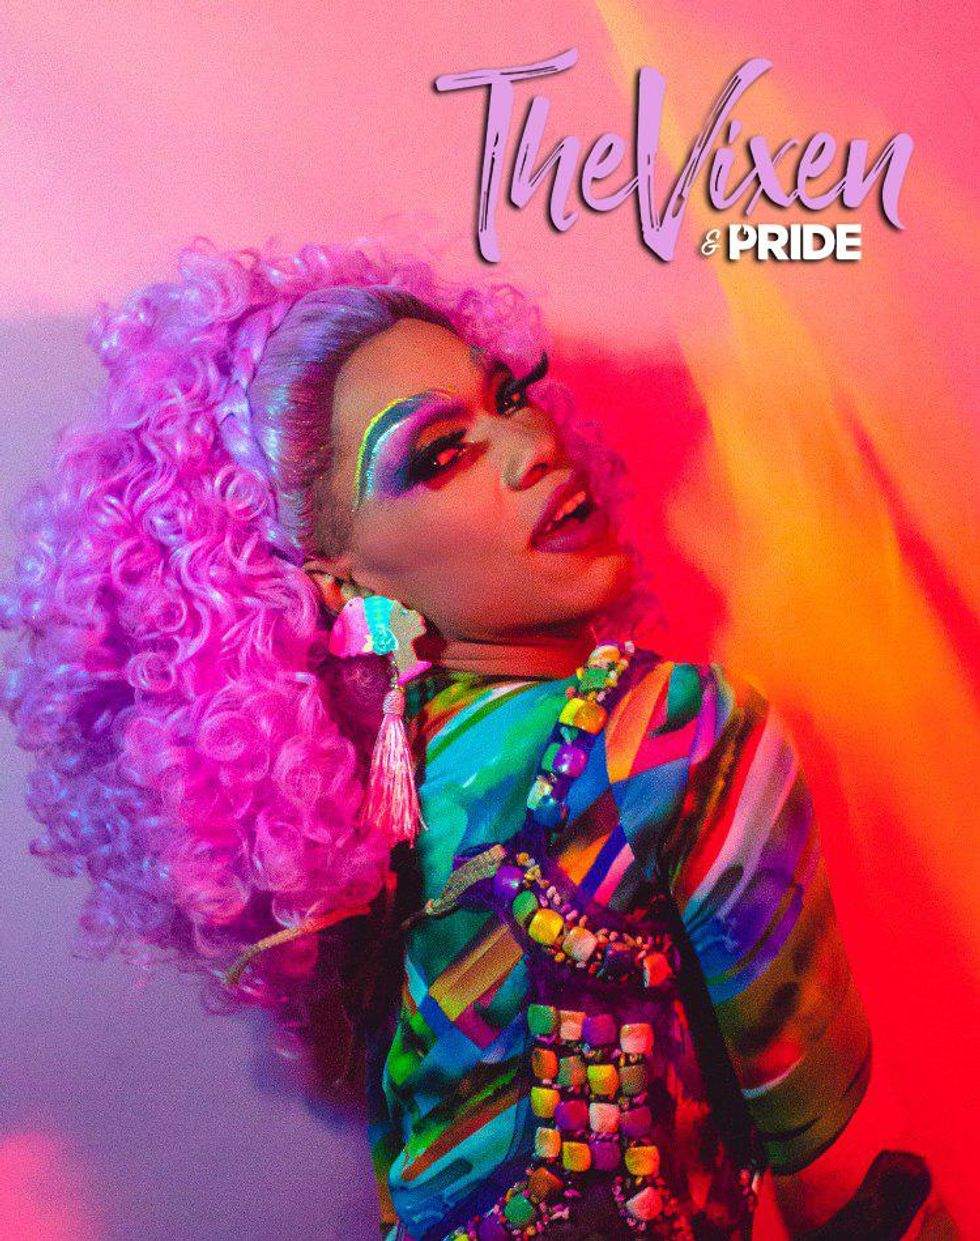 Southside Trash & Proud: The Vixen Says There’s No Place for Prejudice in Pride